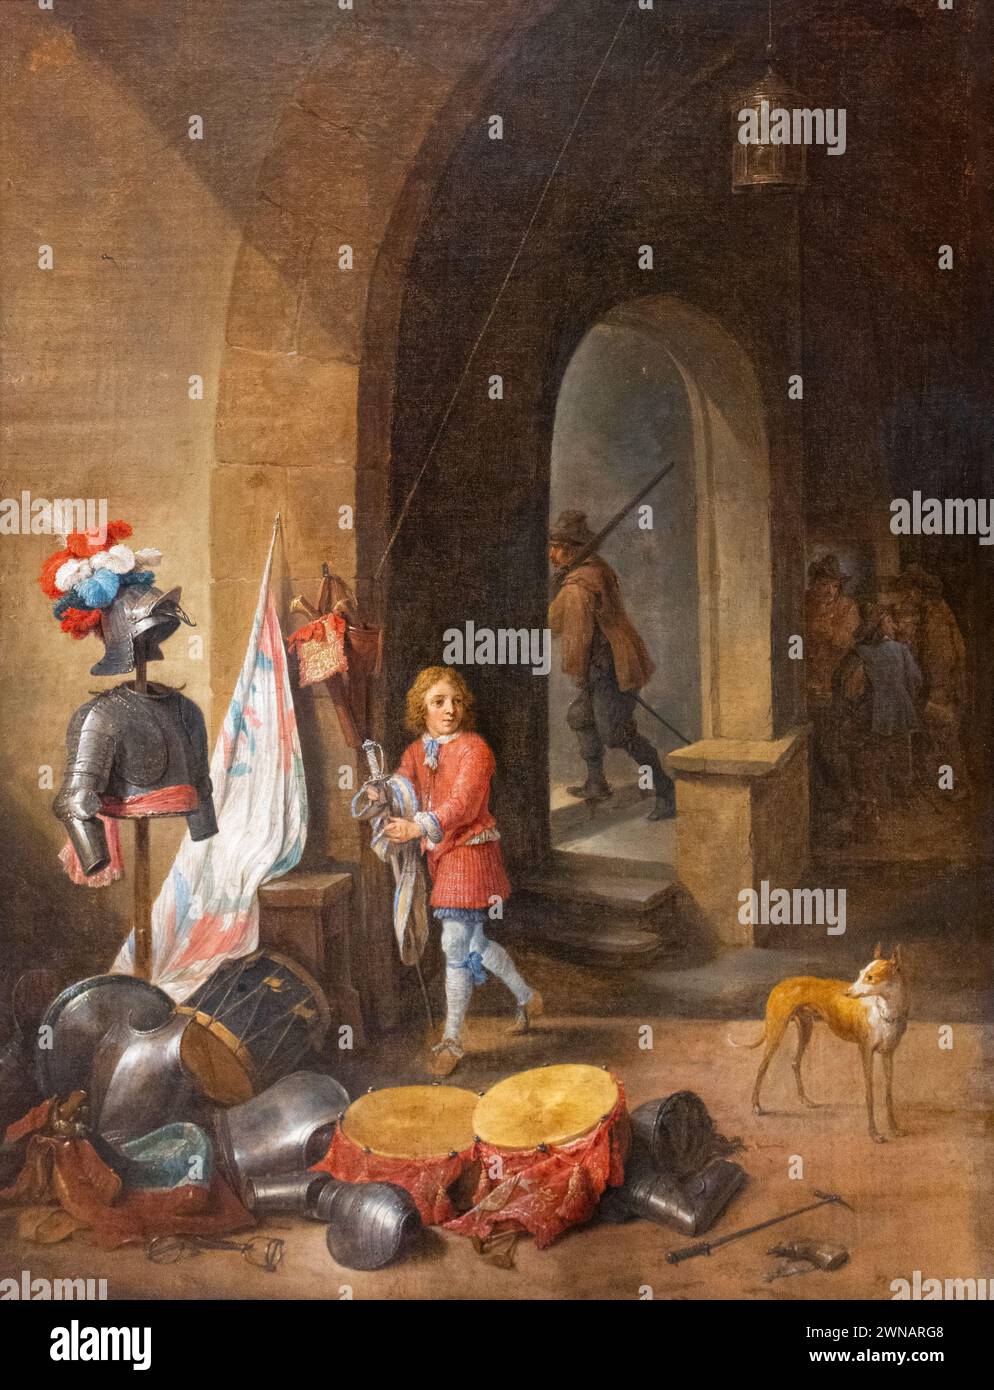 David Teniers the Younger painting; 'A Guardroom', 1640's; 1600s Guardroom; 17th century Flemish Baroque painter, 1610-1690 Stock Photo